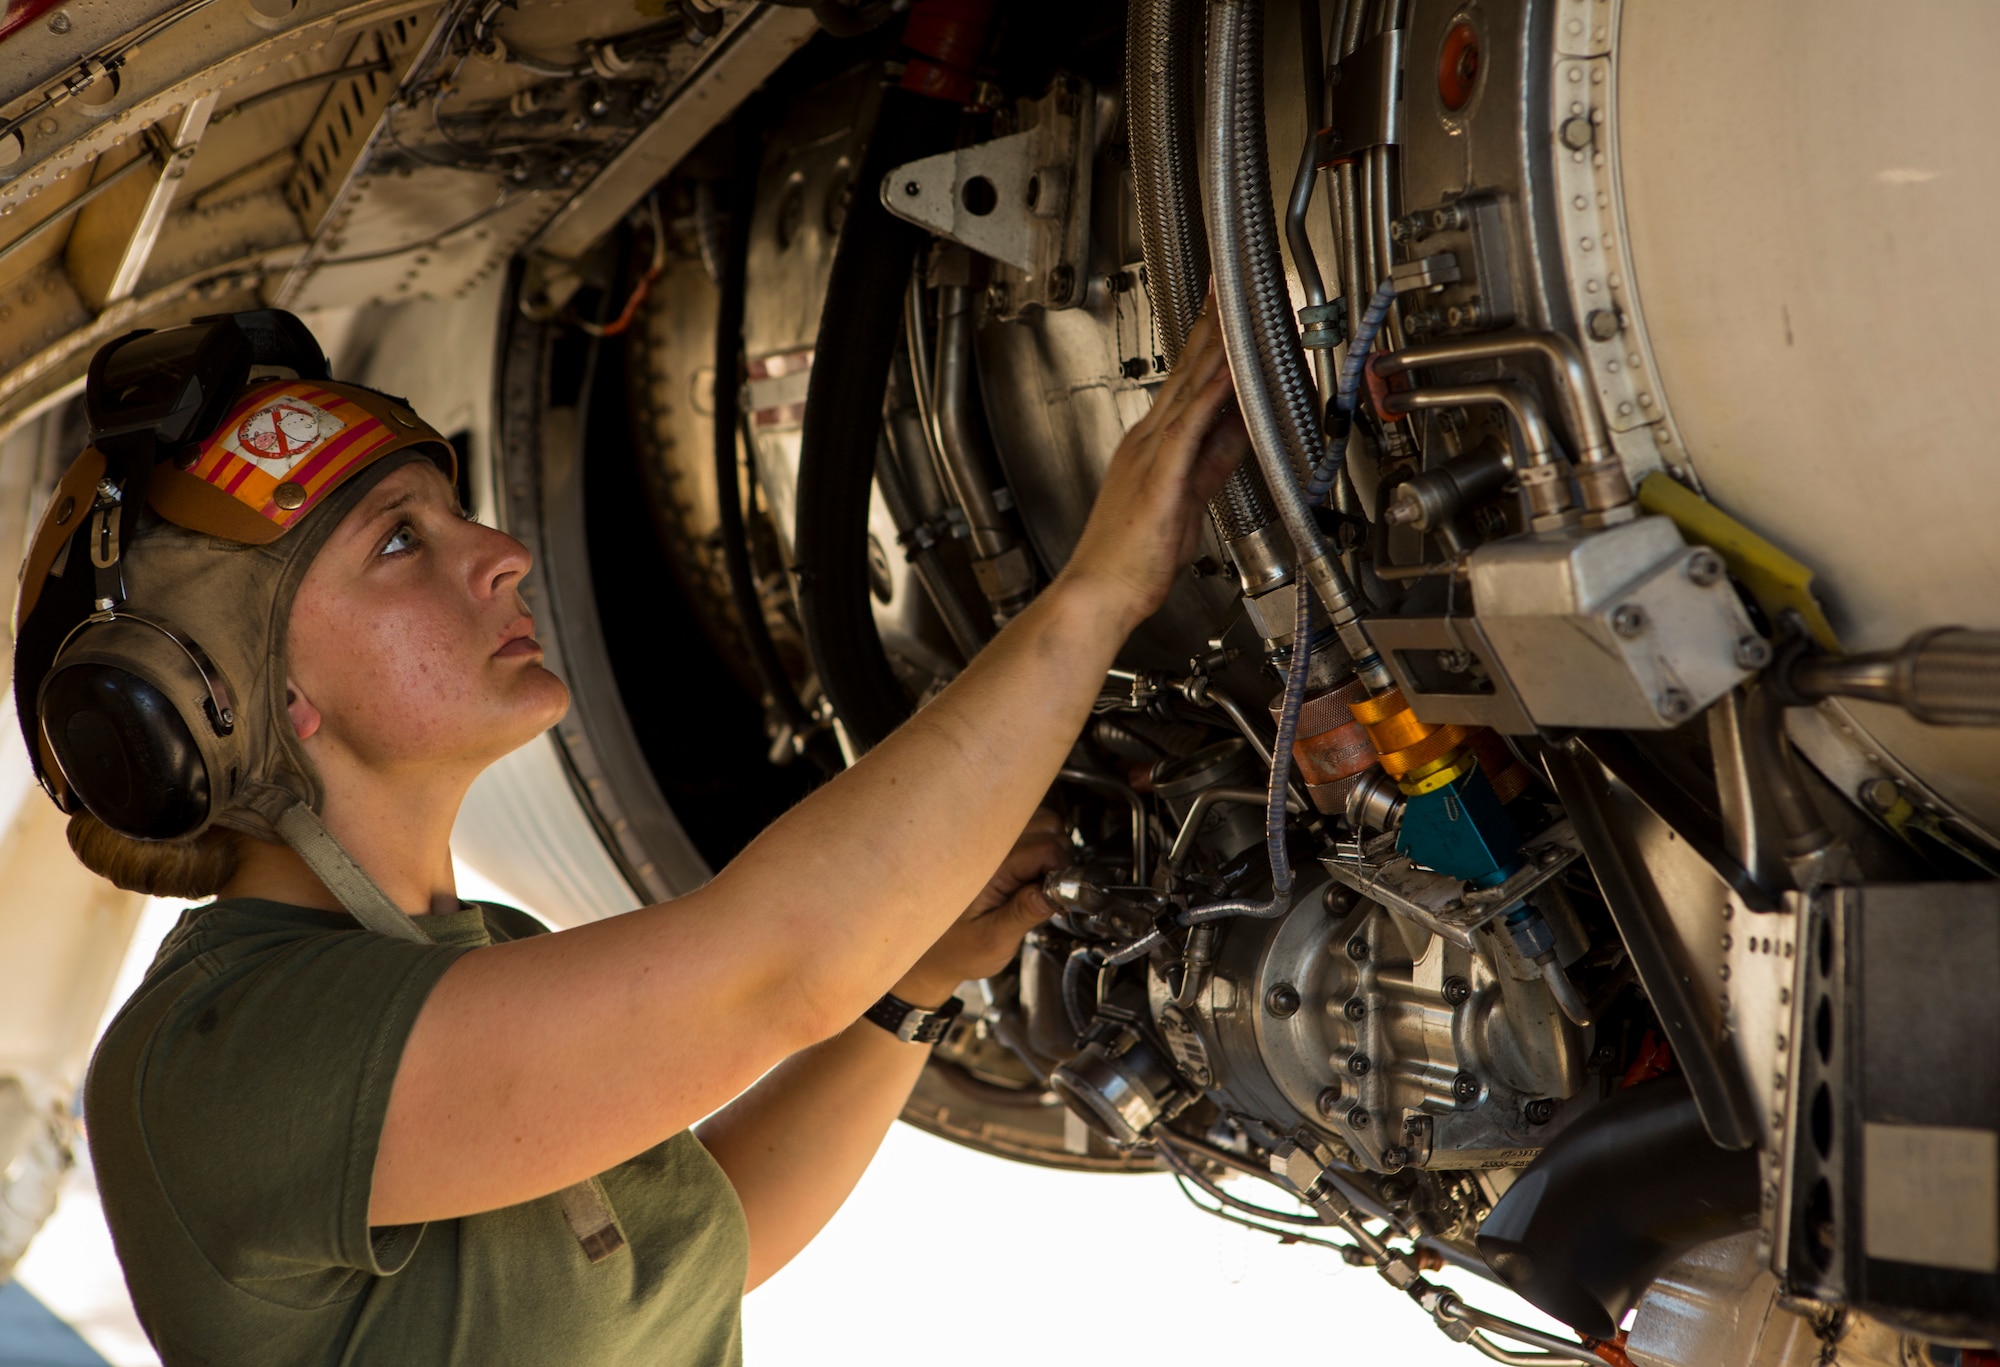 U.S. Marine Corps Lance Cpl. Jessica Kerr, a plane captain with Marine Tactical Electronic Warfare Squadron (VMAQ) 2, 2nd Marine Aircraft Wing conducts maintenance on a Marine Corps EA-6B Prowler assigned to VMAQ-2, prior to a flight during Exercise Northern Edge 15 at Eielson Air Force Base, Alaska, June 15, 2015. Northern Edge is Alaska’s premier joint training exercise designed to practice operations, techniques and procedures as well as enhance interoperability among the services. Thousands of participants from all services, Airmen, Soldiers, Sailors, Marines and Coast Guardsmen from active duty, Reserve and National Guard units are involved. (U.S. Marine Corps photo by Cpl. Suzanne Dickson/Released)